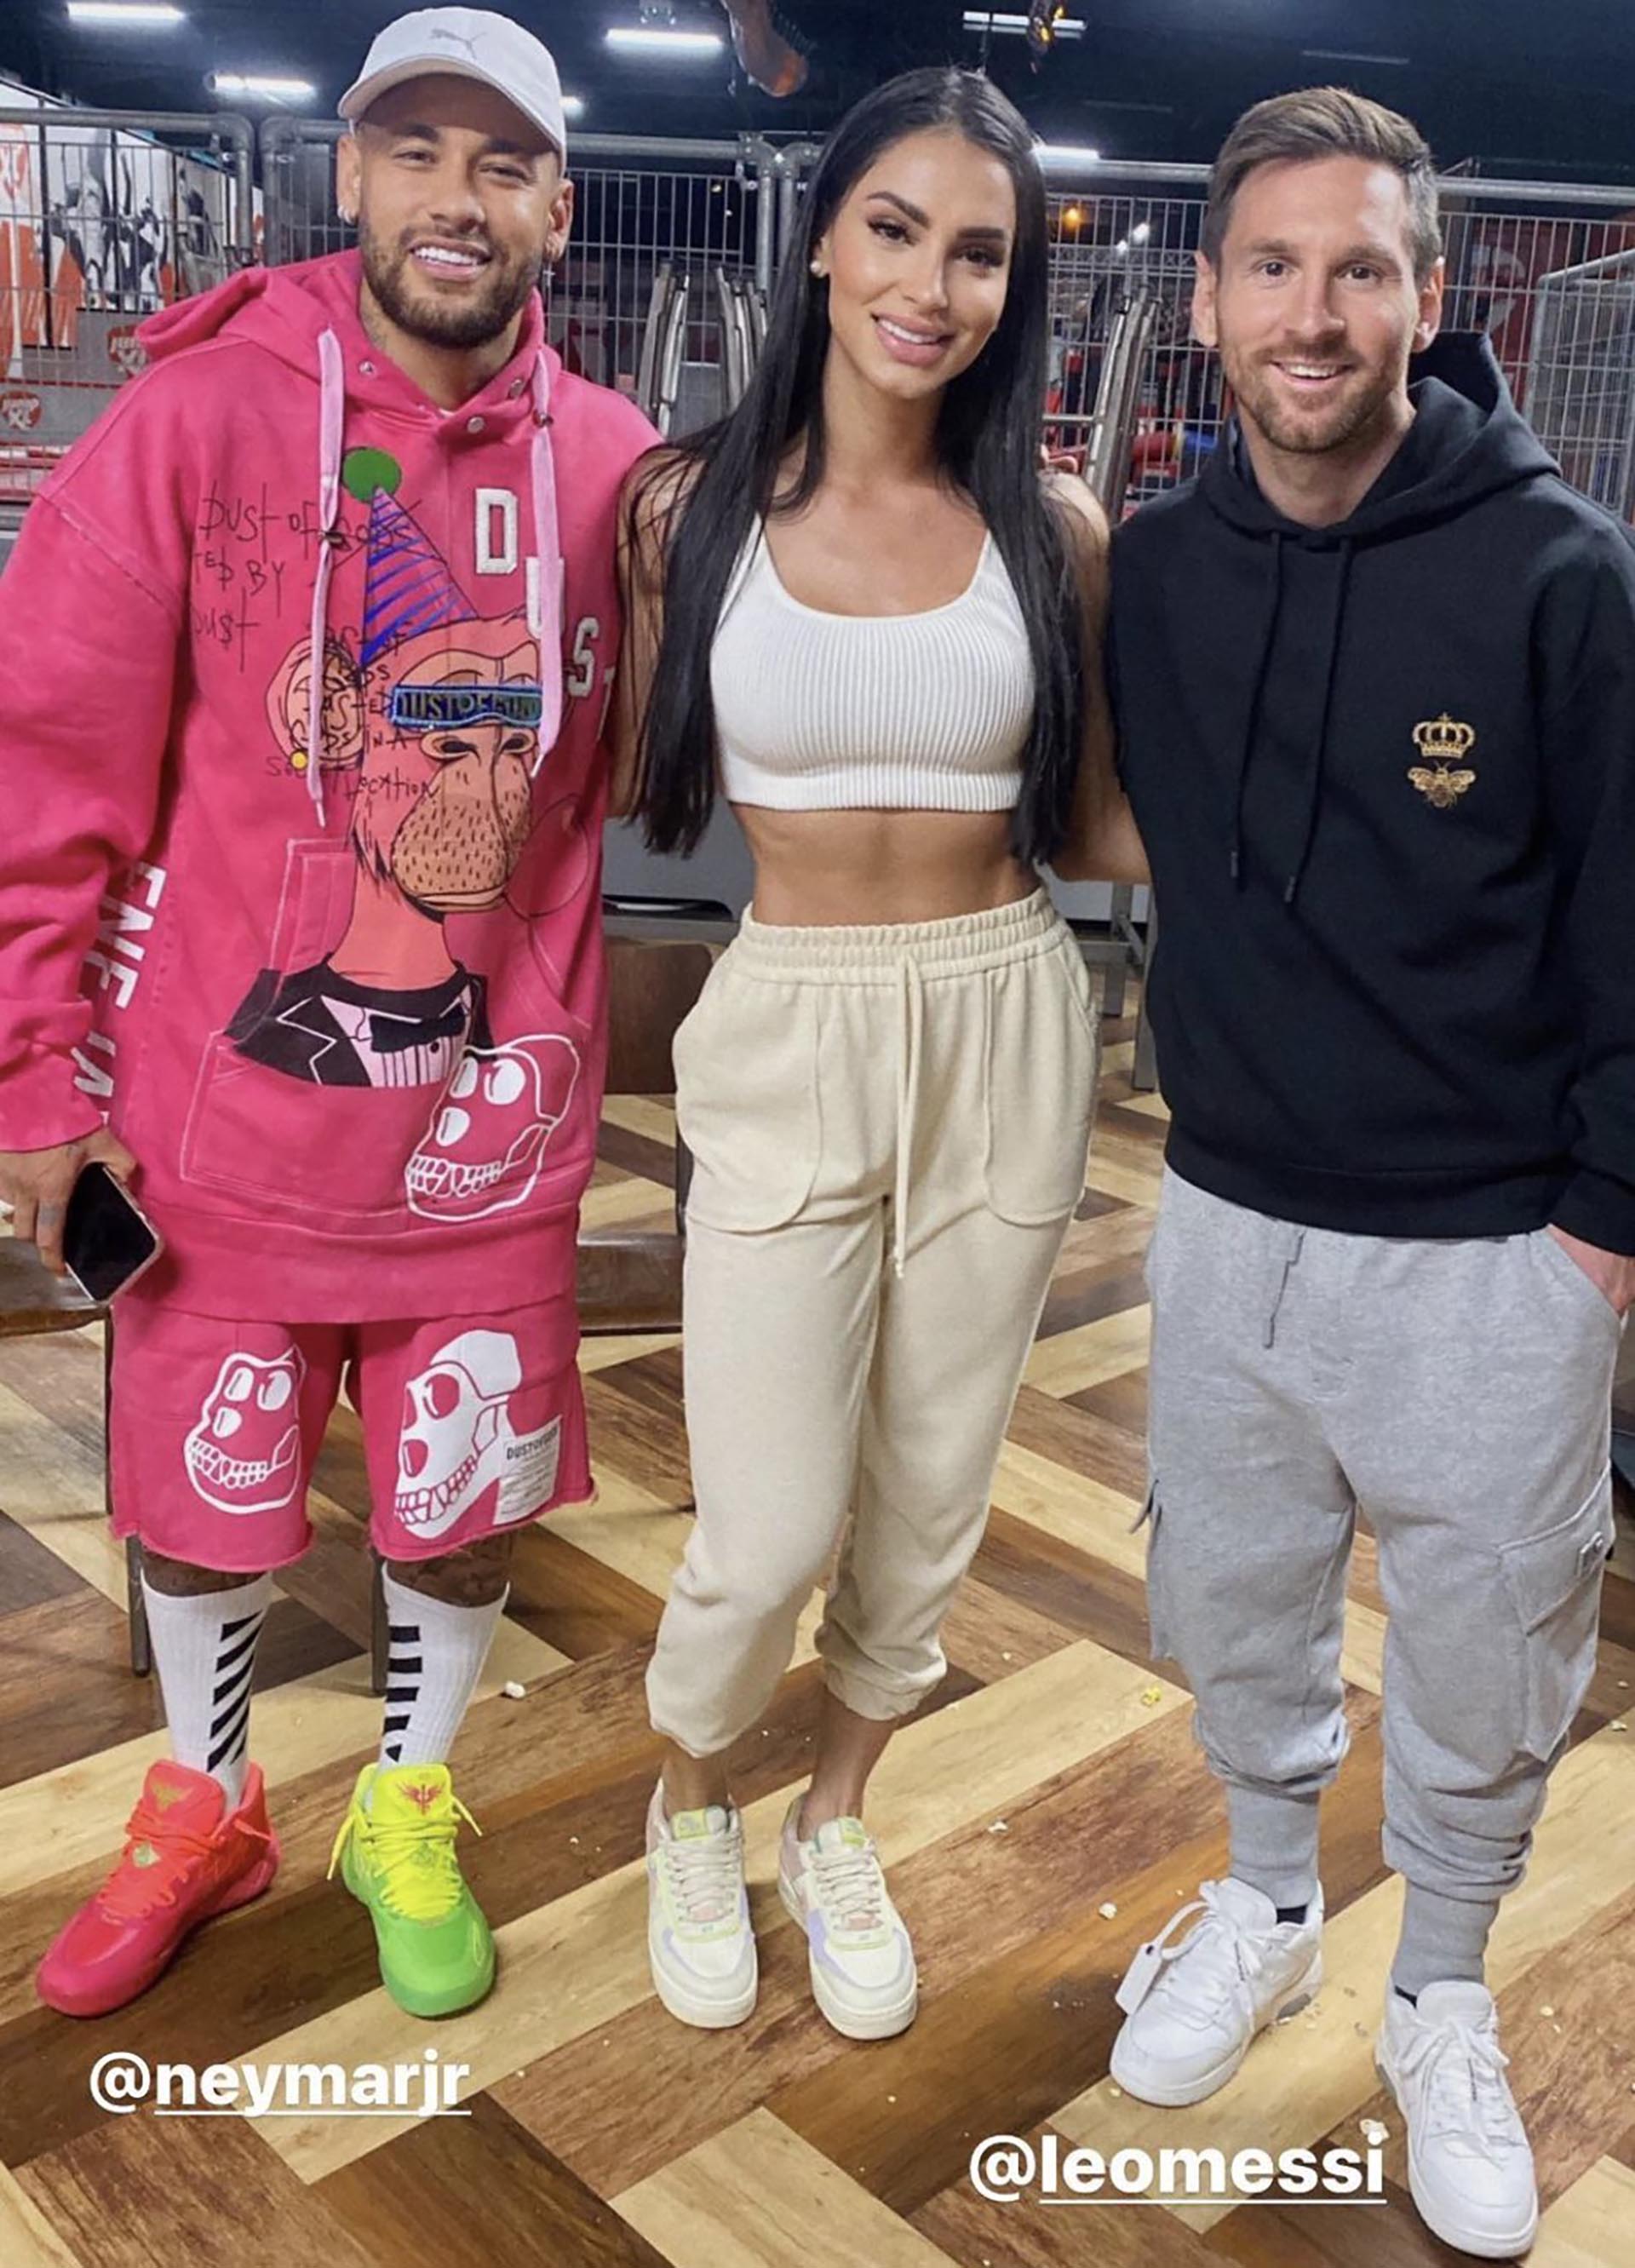 Neymar's striking outfit that revolutionized social media in a photo with  Lionel Messi - Infobae